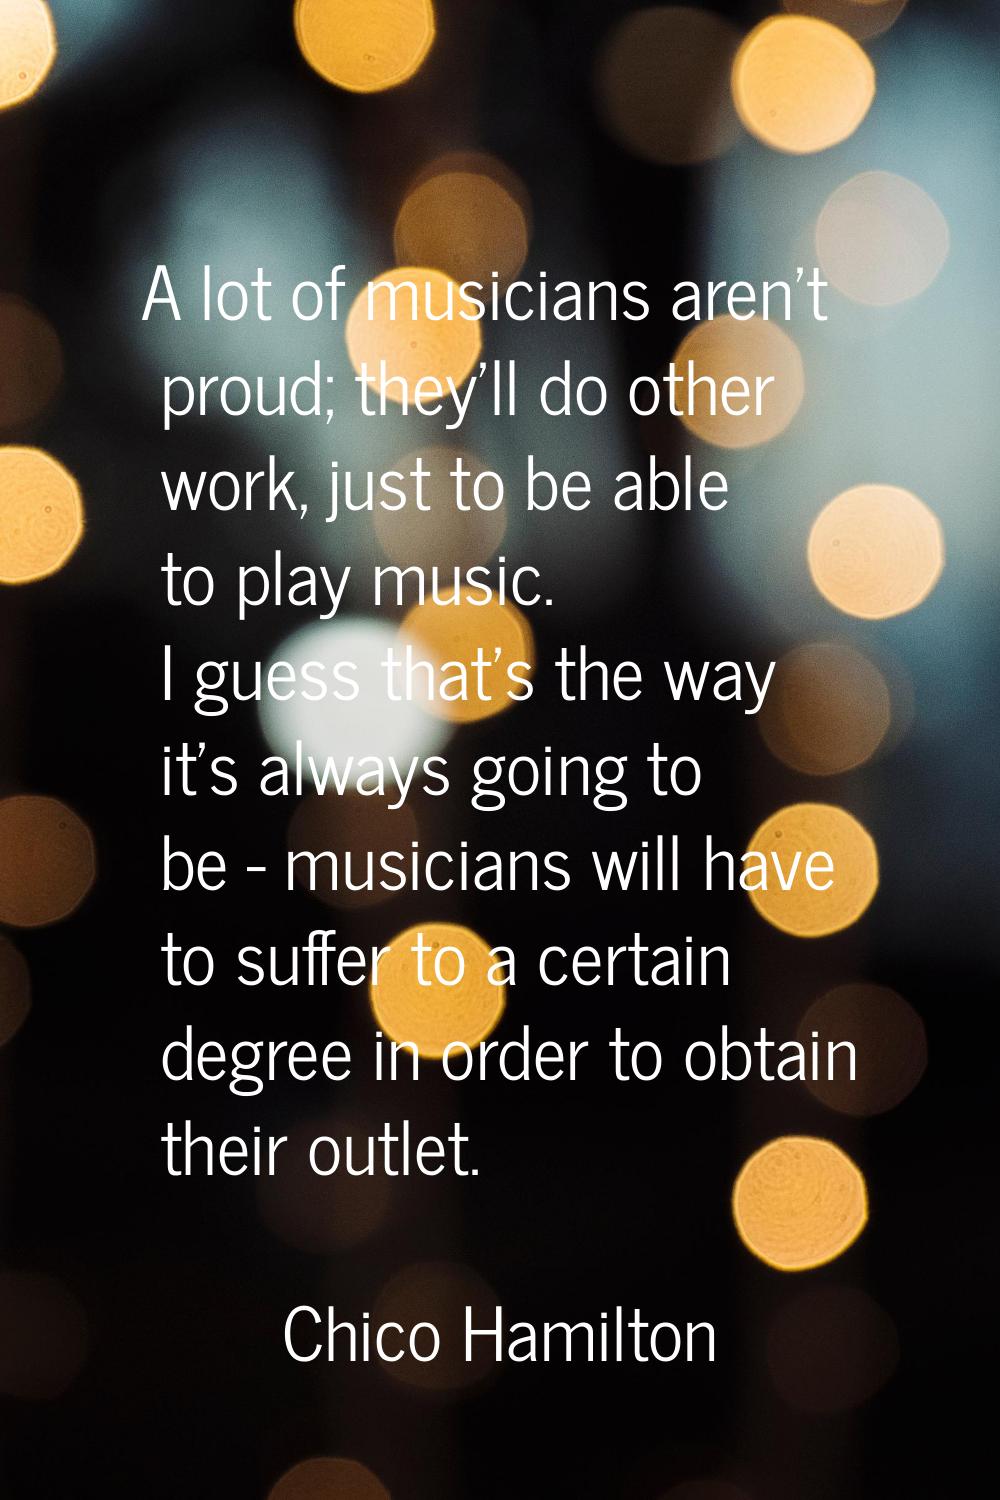 A lot of musicians aren't proud; they'll do other work, just to be able to play music. I guess that